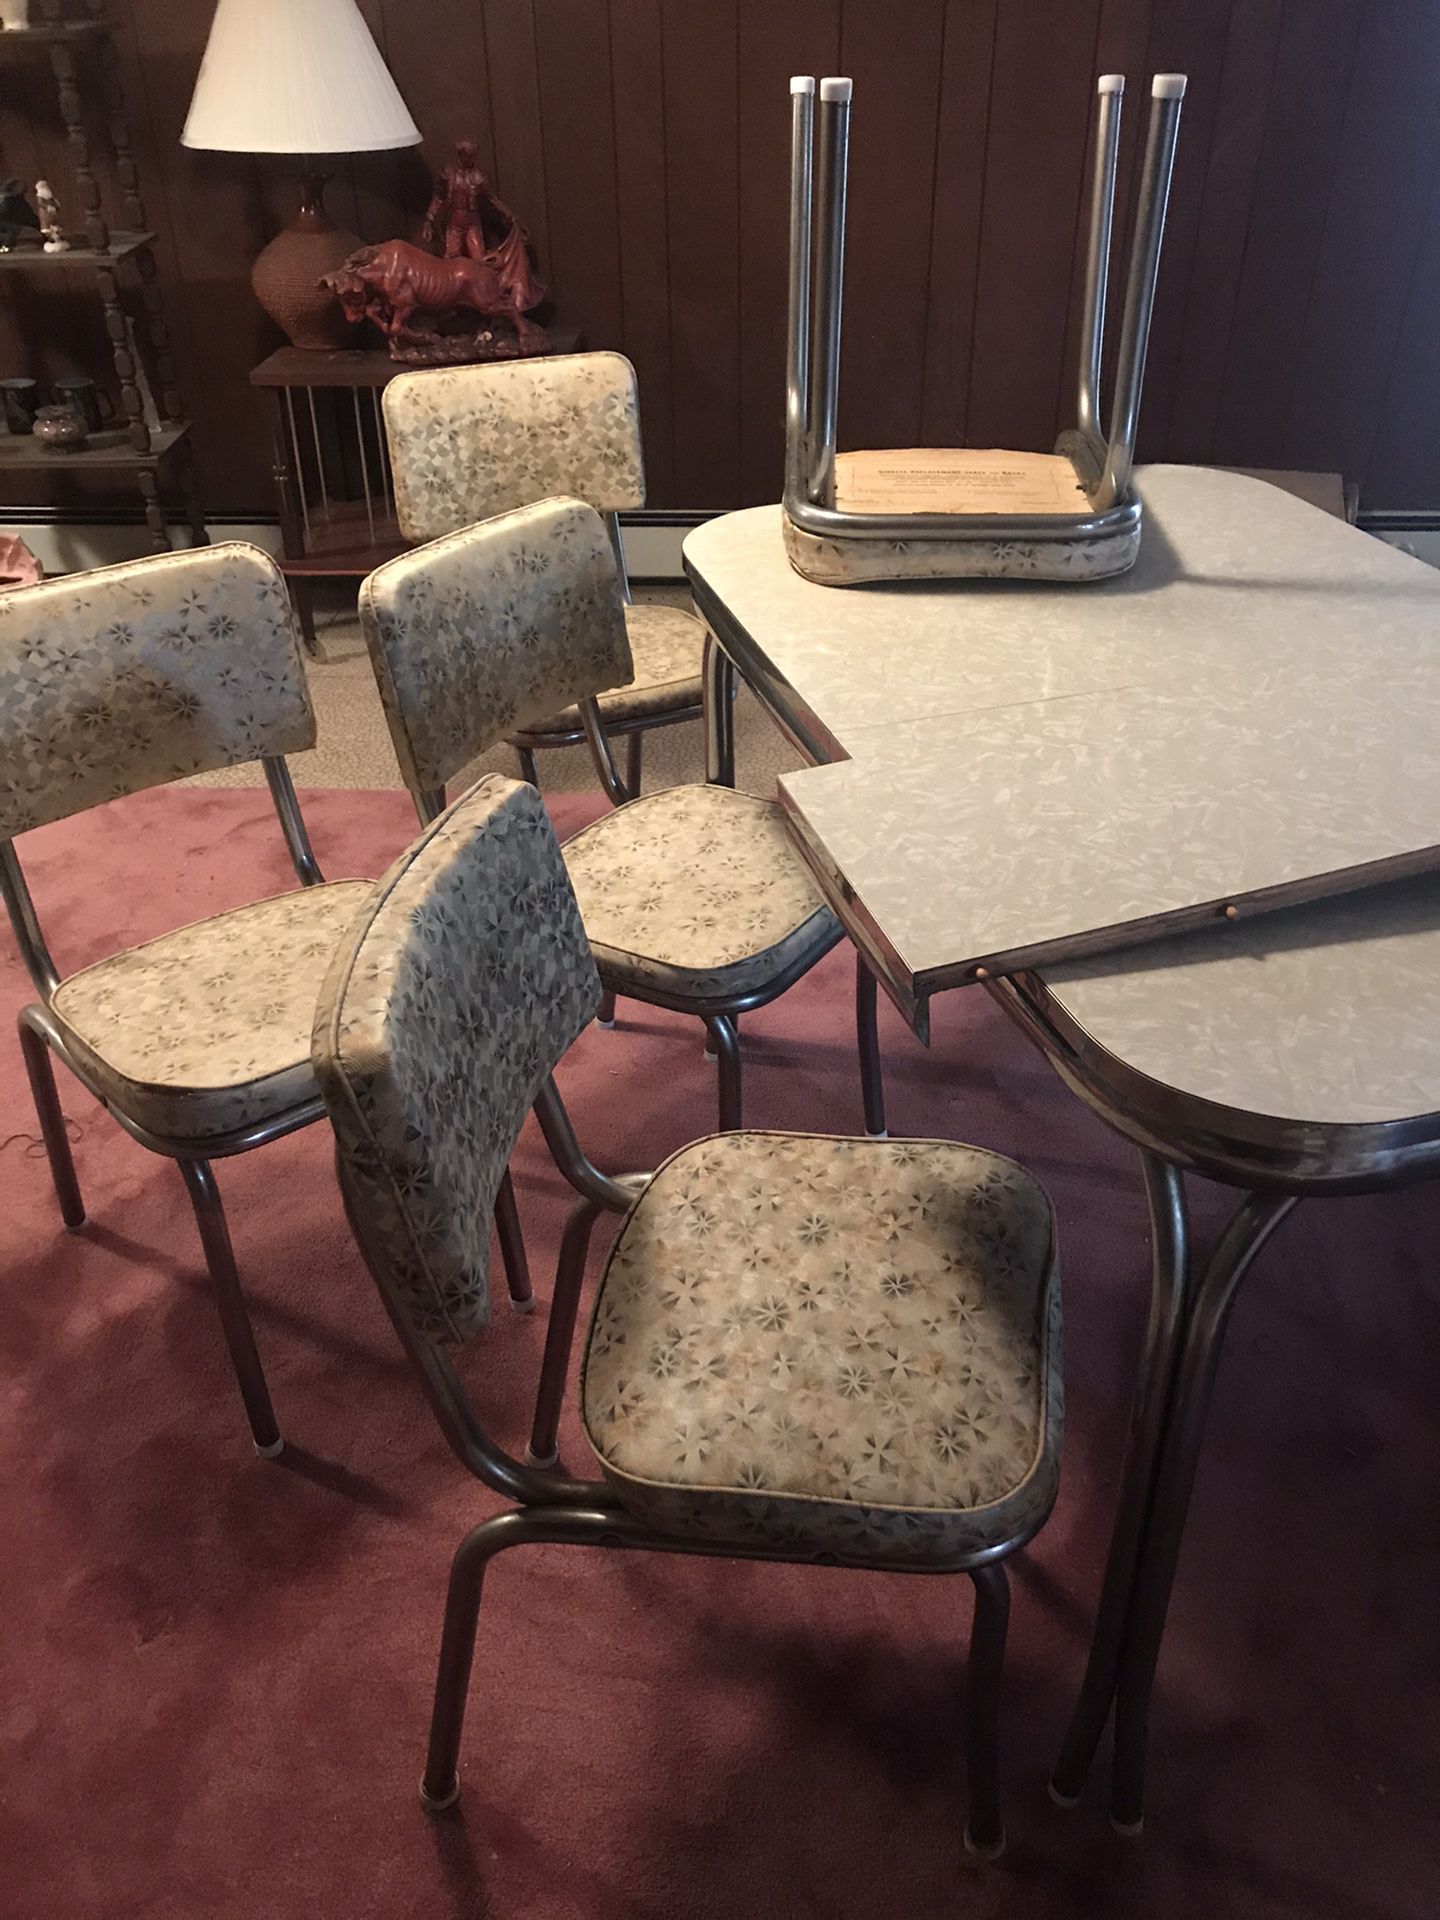 Original Retro Chrome Kitchen Table, 6 chairs, Formica ,1950’s, 1960’s, Deluxe Dinette, Great Condition